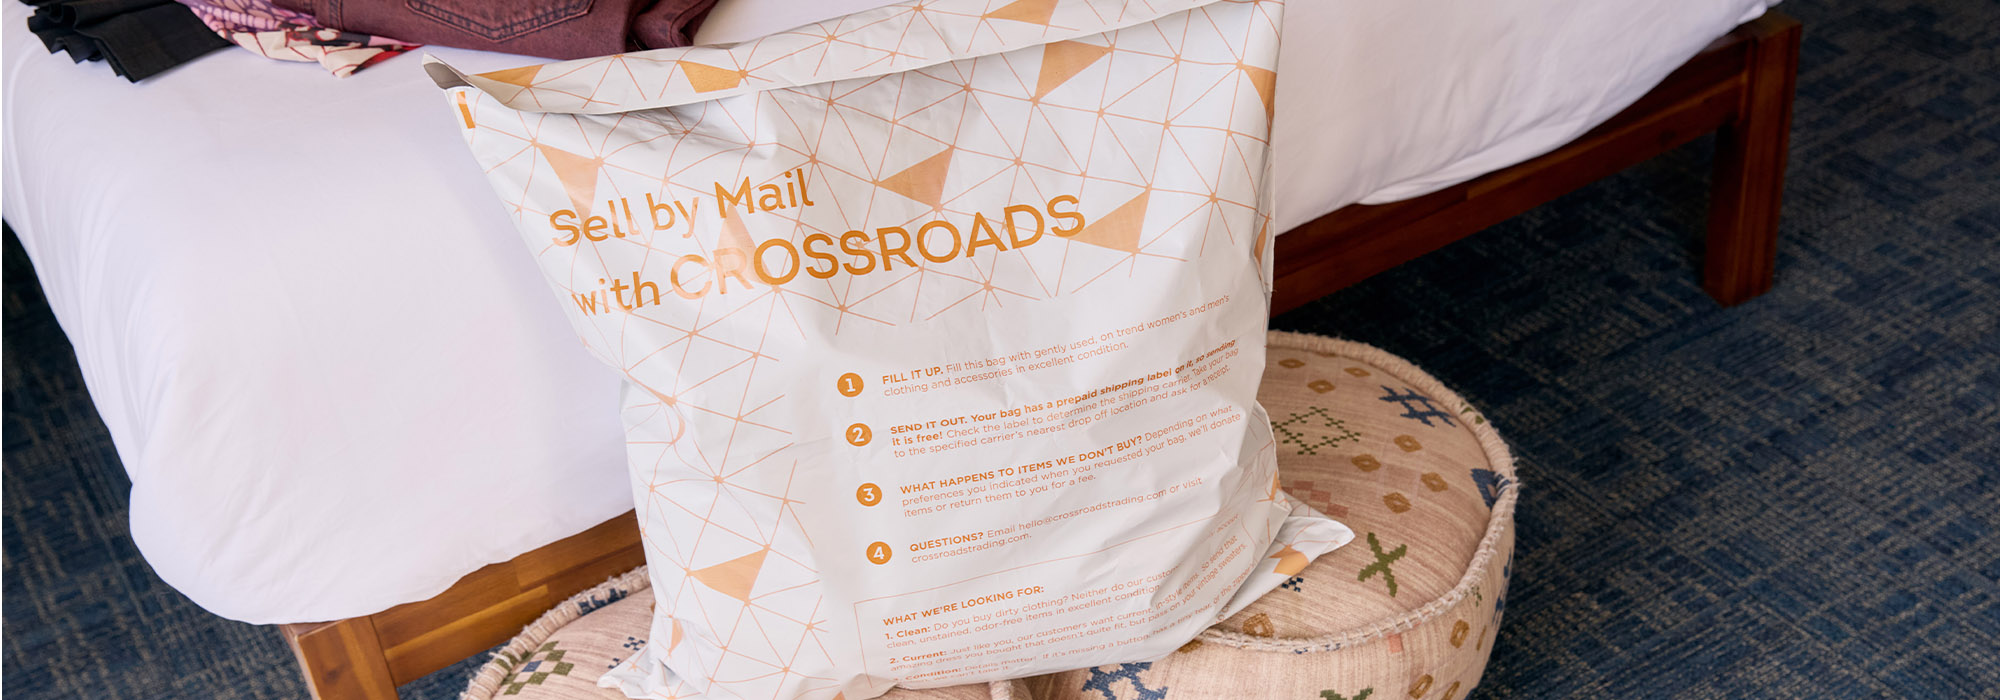 Crossroads sell by mail white plastic bag